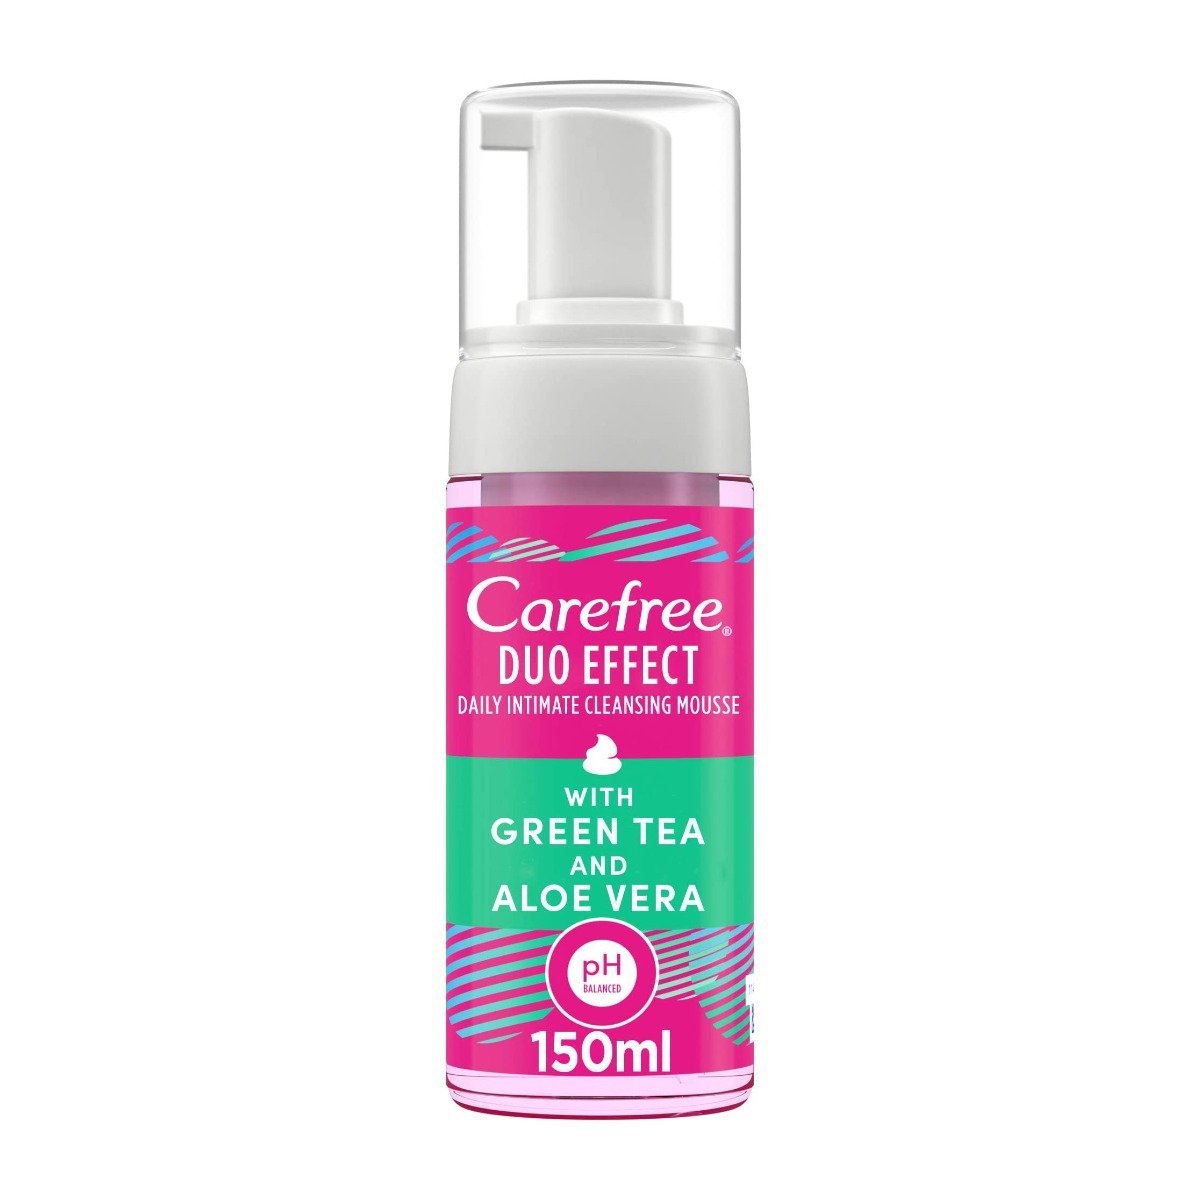 Carefree Duo Effect Daily Intimate Cleansing Mousse With Green Tea & Aloe Vera - 150ml - Bloom Pharmacy